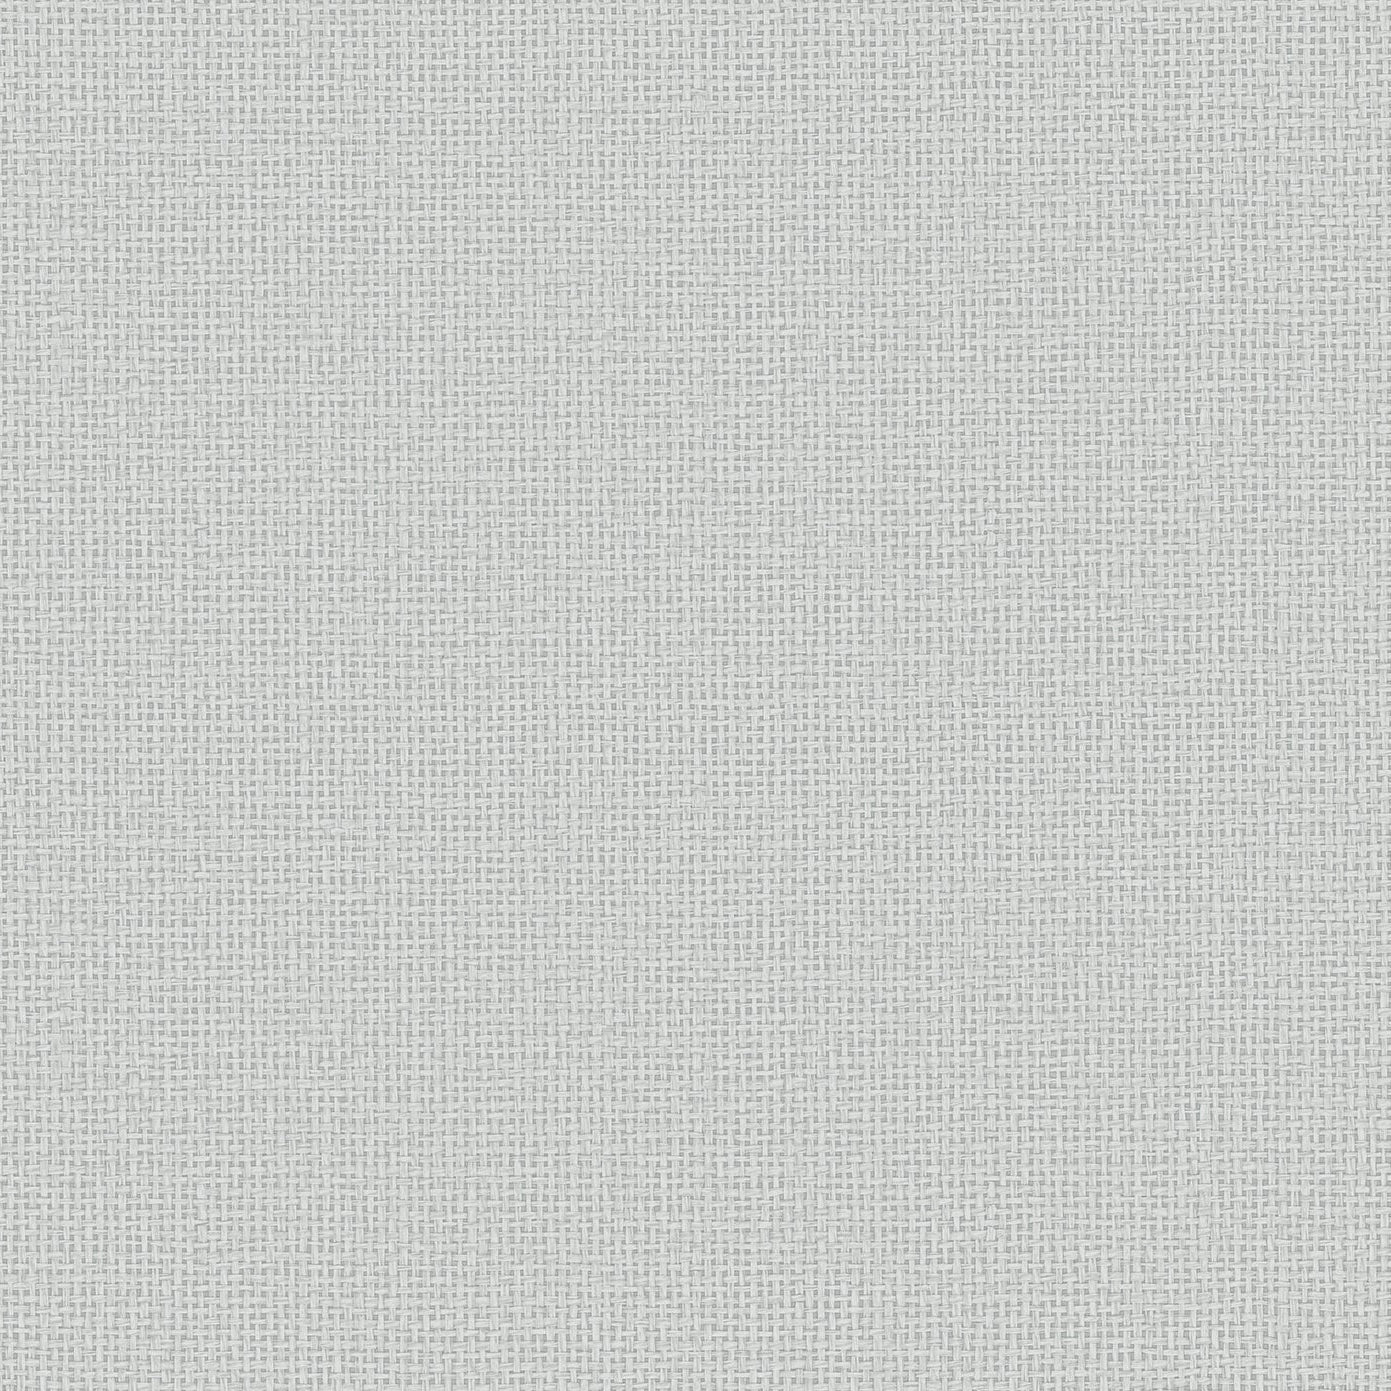 Save on 2927-81018 Newport Marblehead Grey Crosshatched Grasscloth Grey A-Street Prints Wallpaper